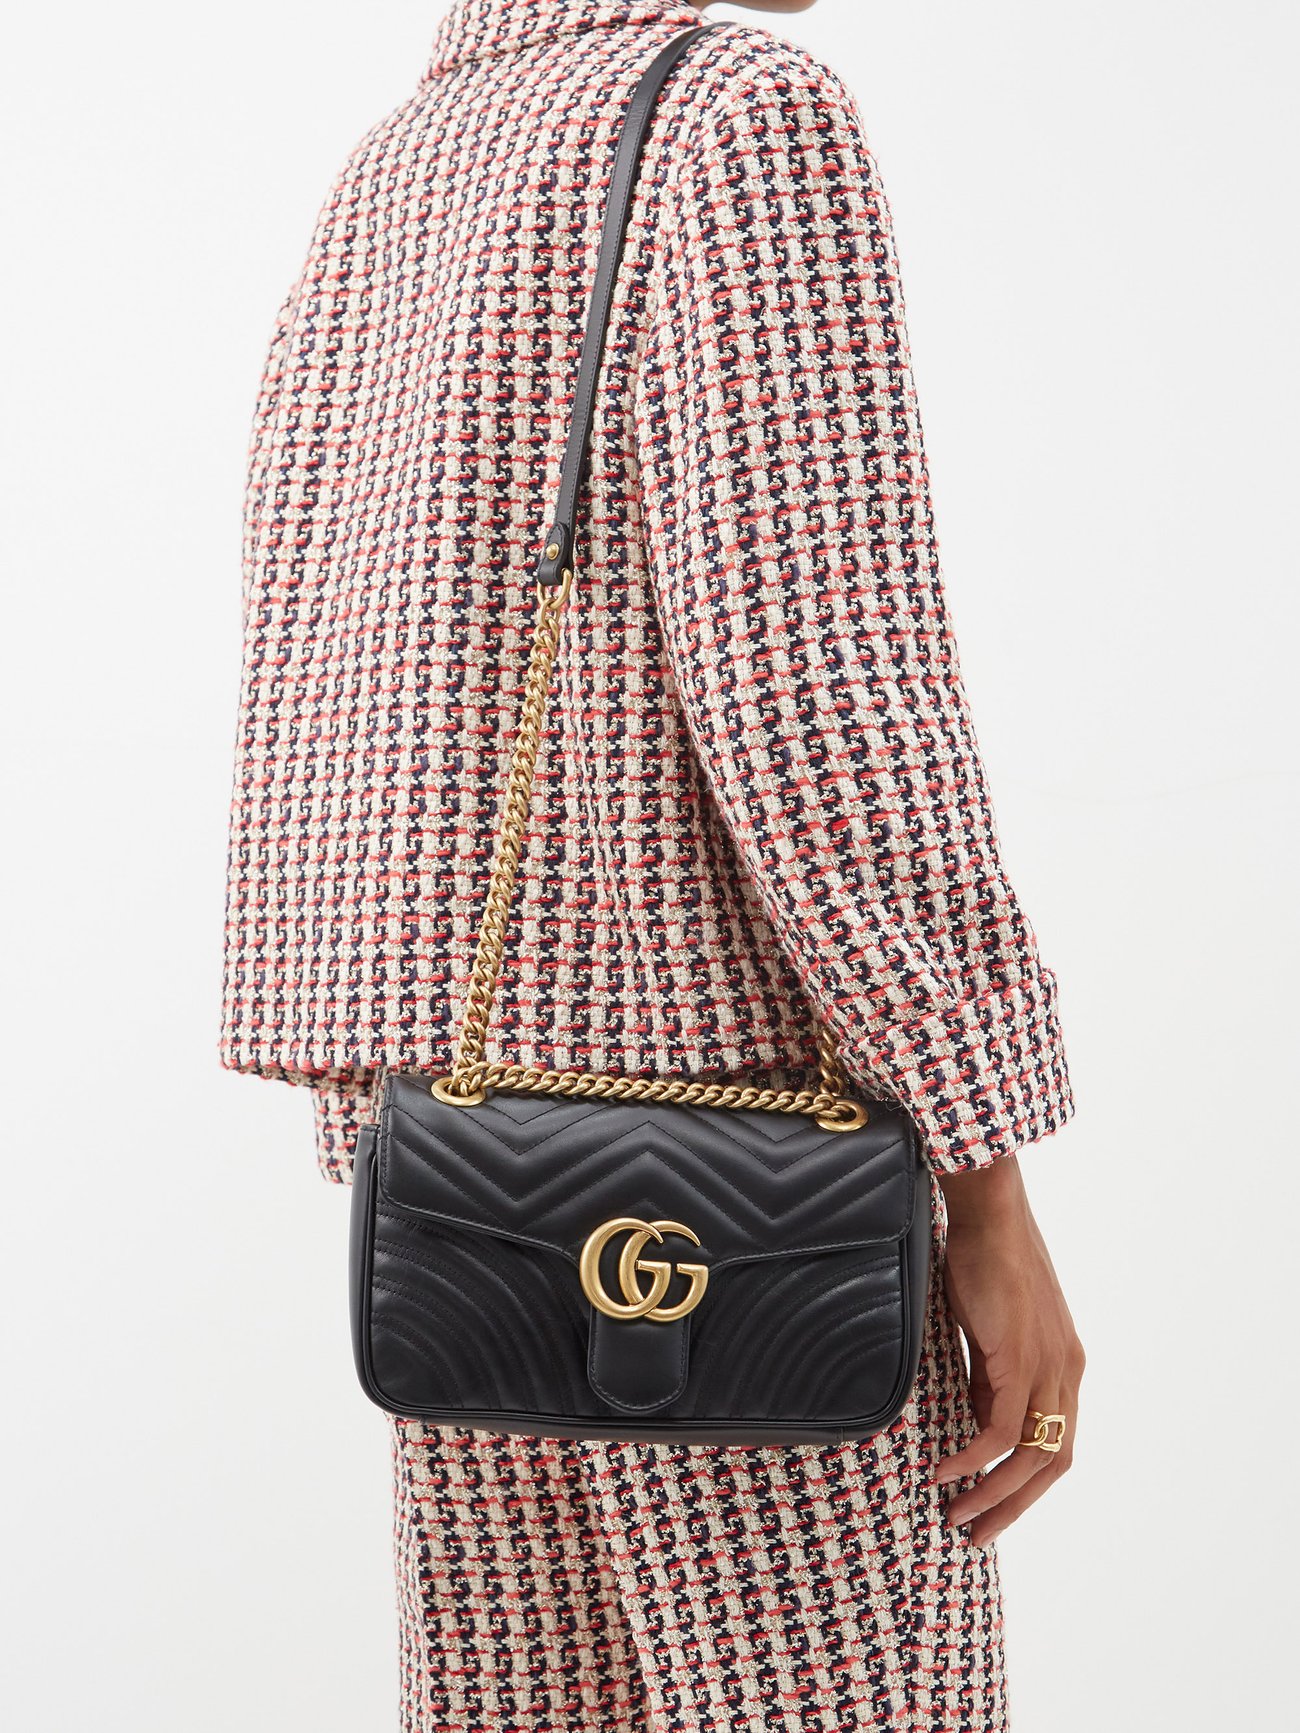 Gucci GG Marmont Small Quilted Leather Shoulder Bag